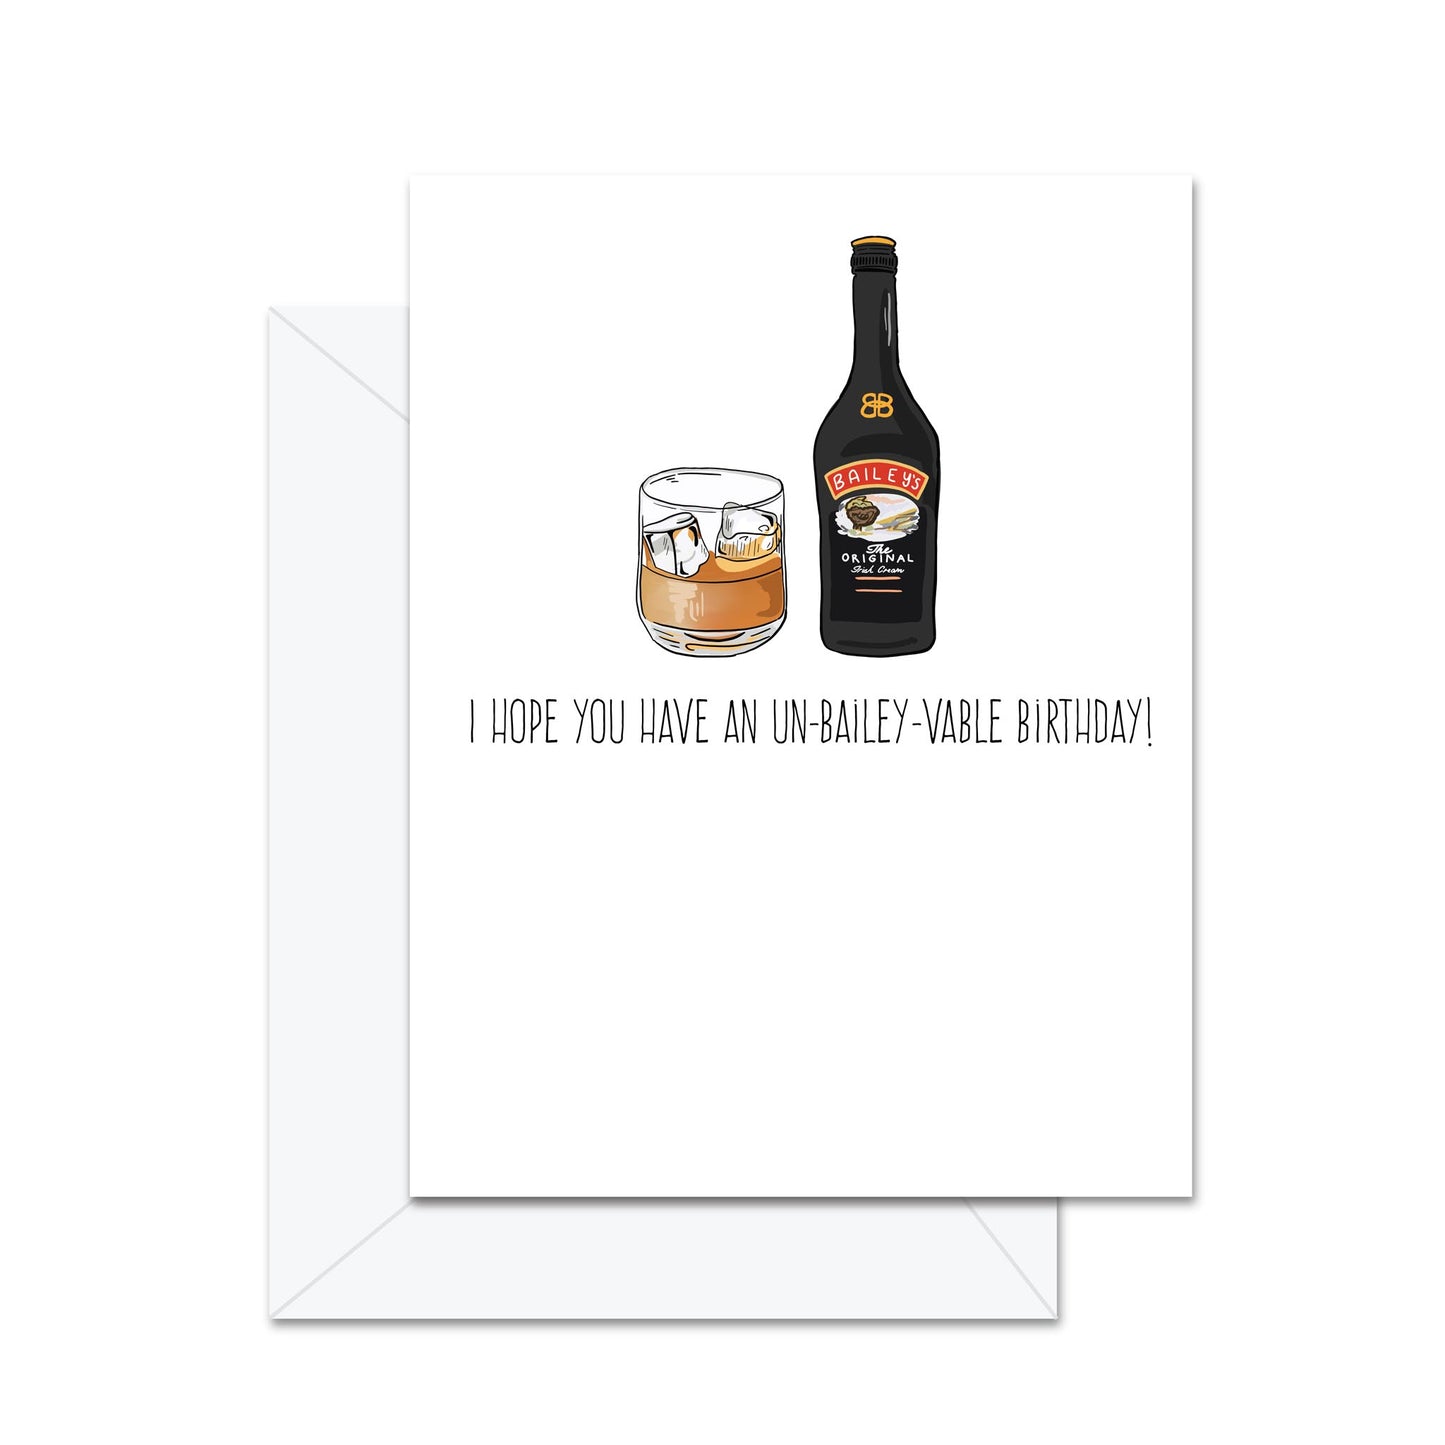 I Hope You Have An Un-Bailey-Vable Birthday! - Greeting Card